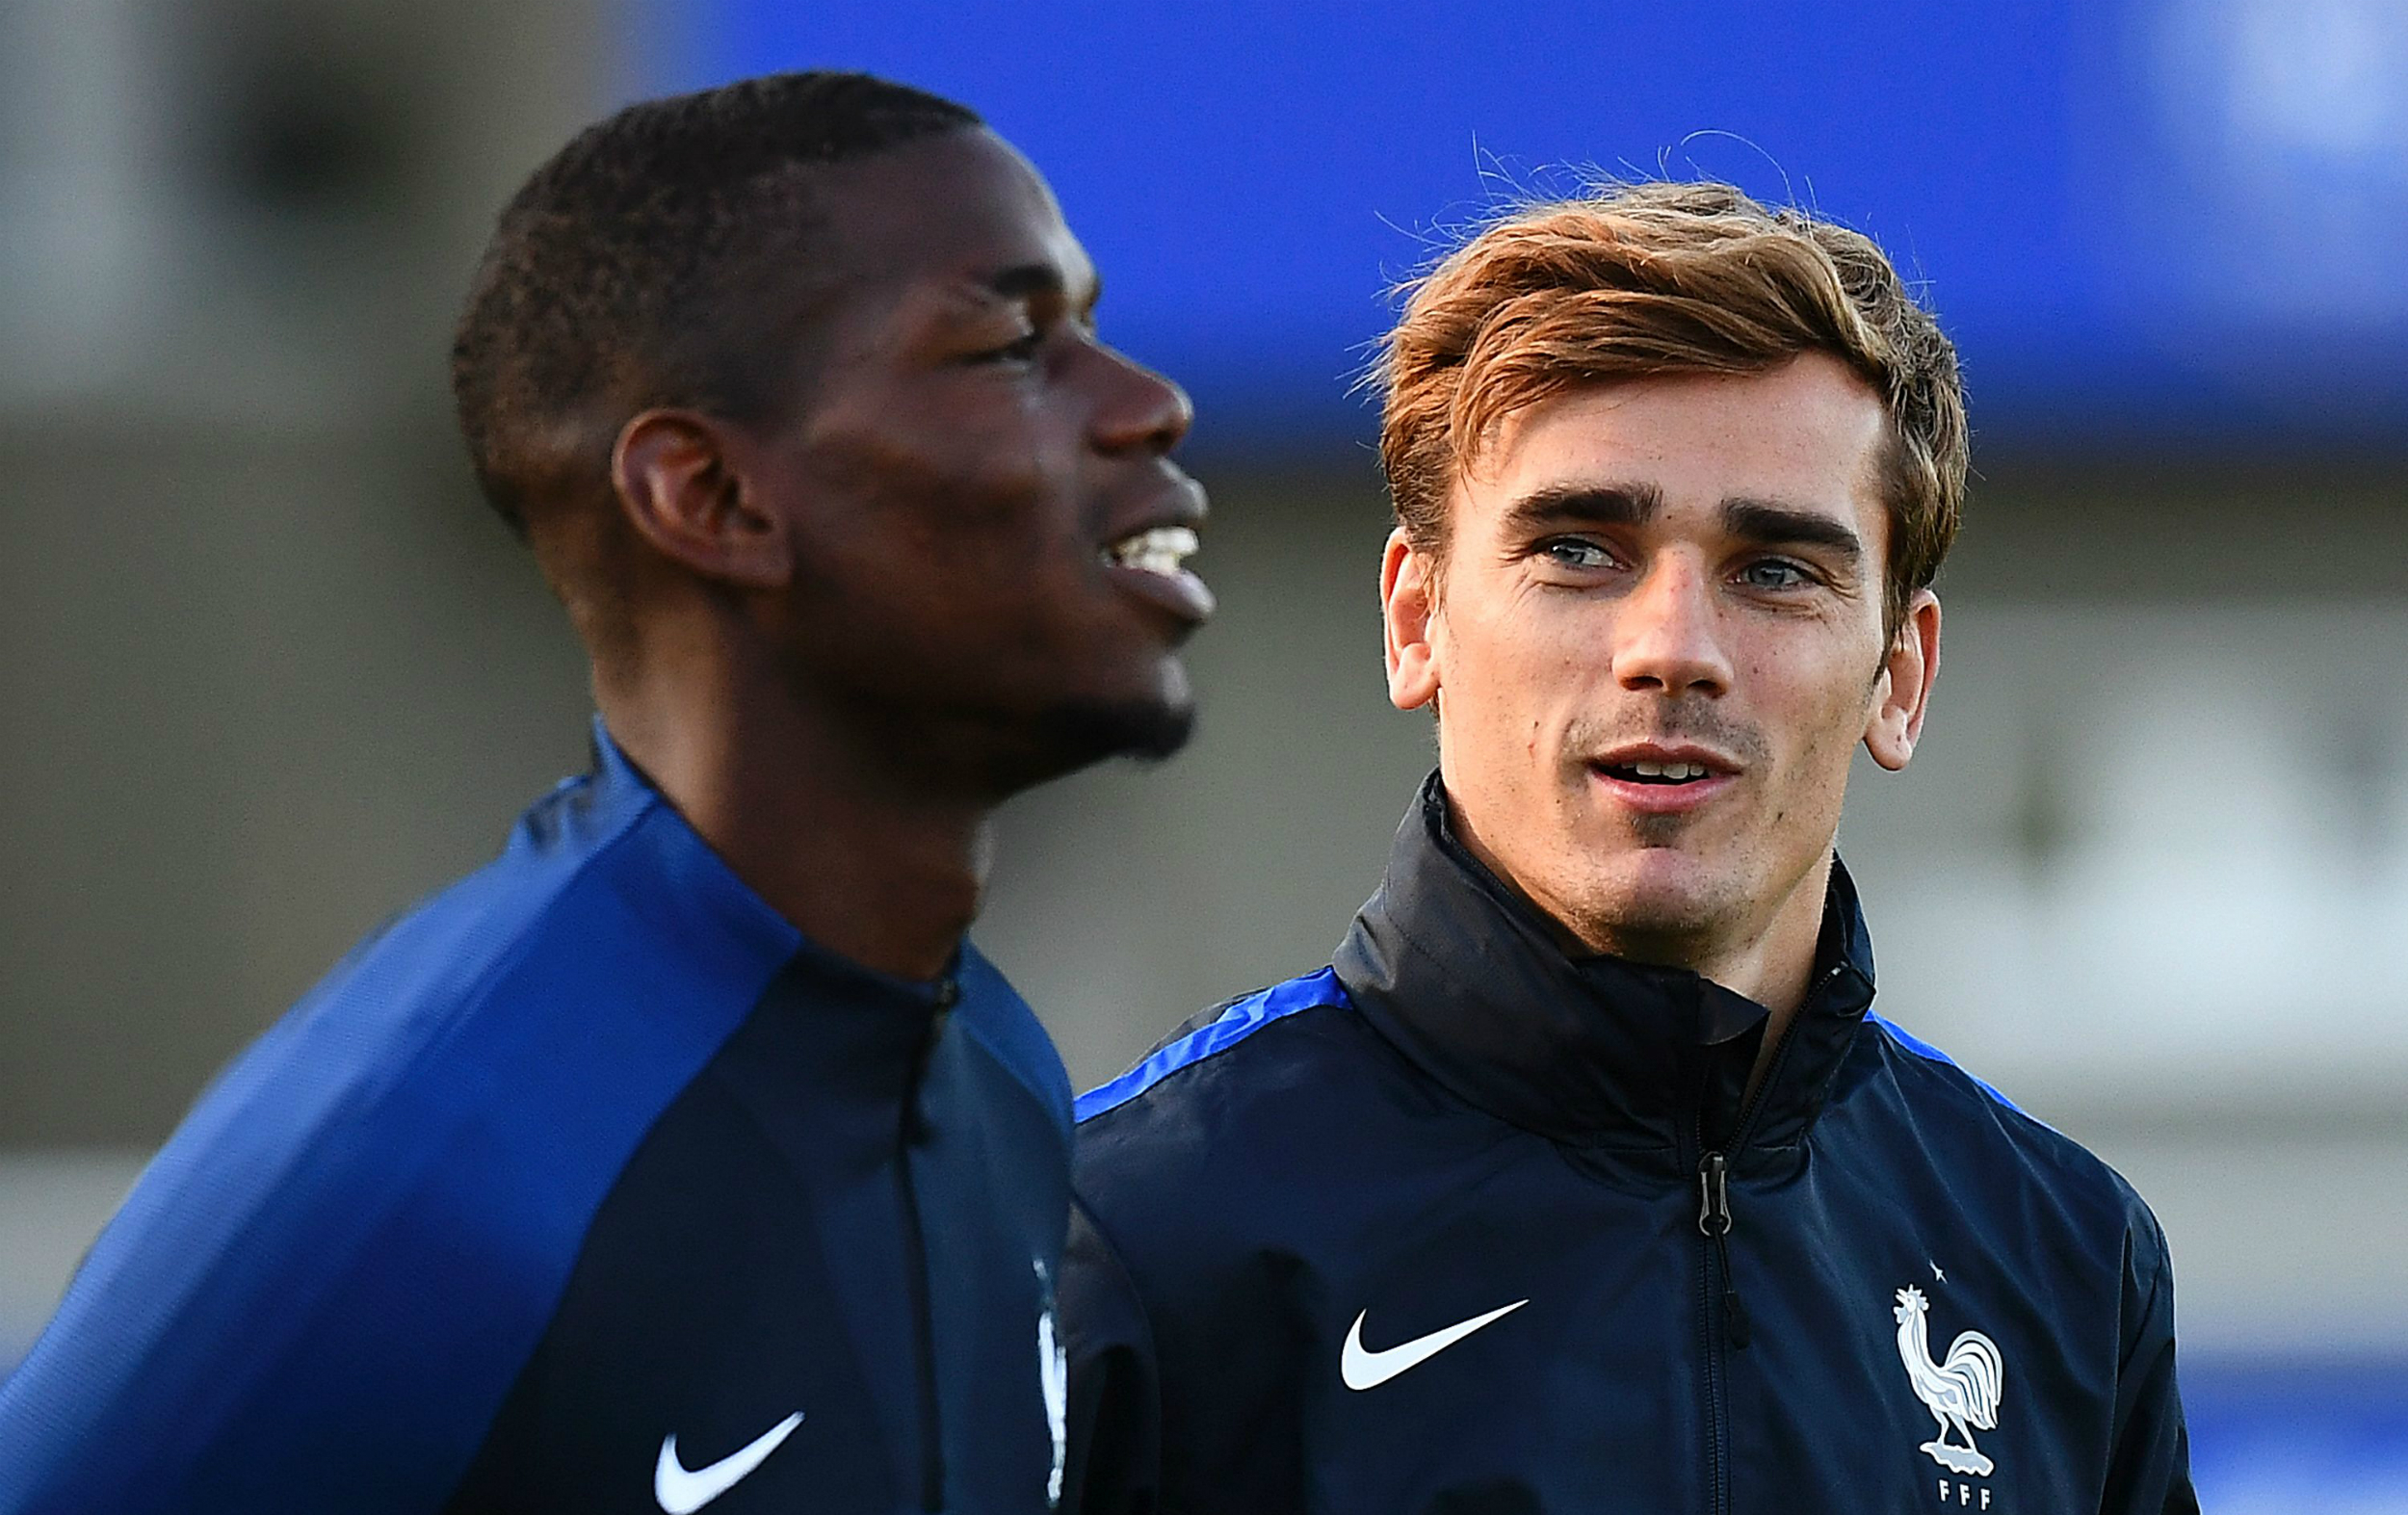 Pogba and Griezmann